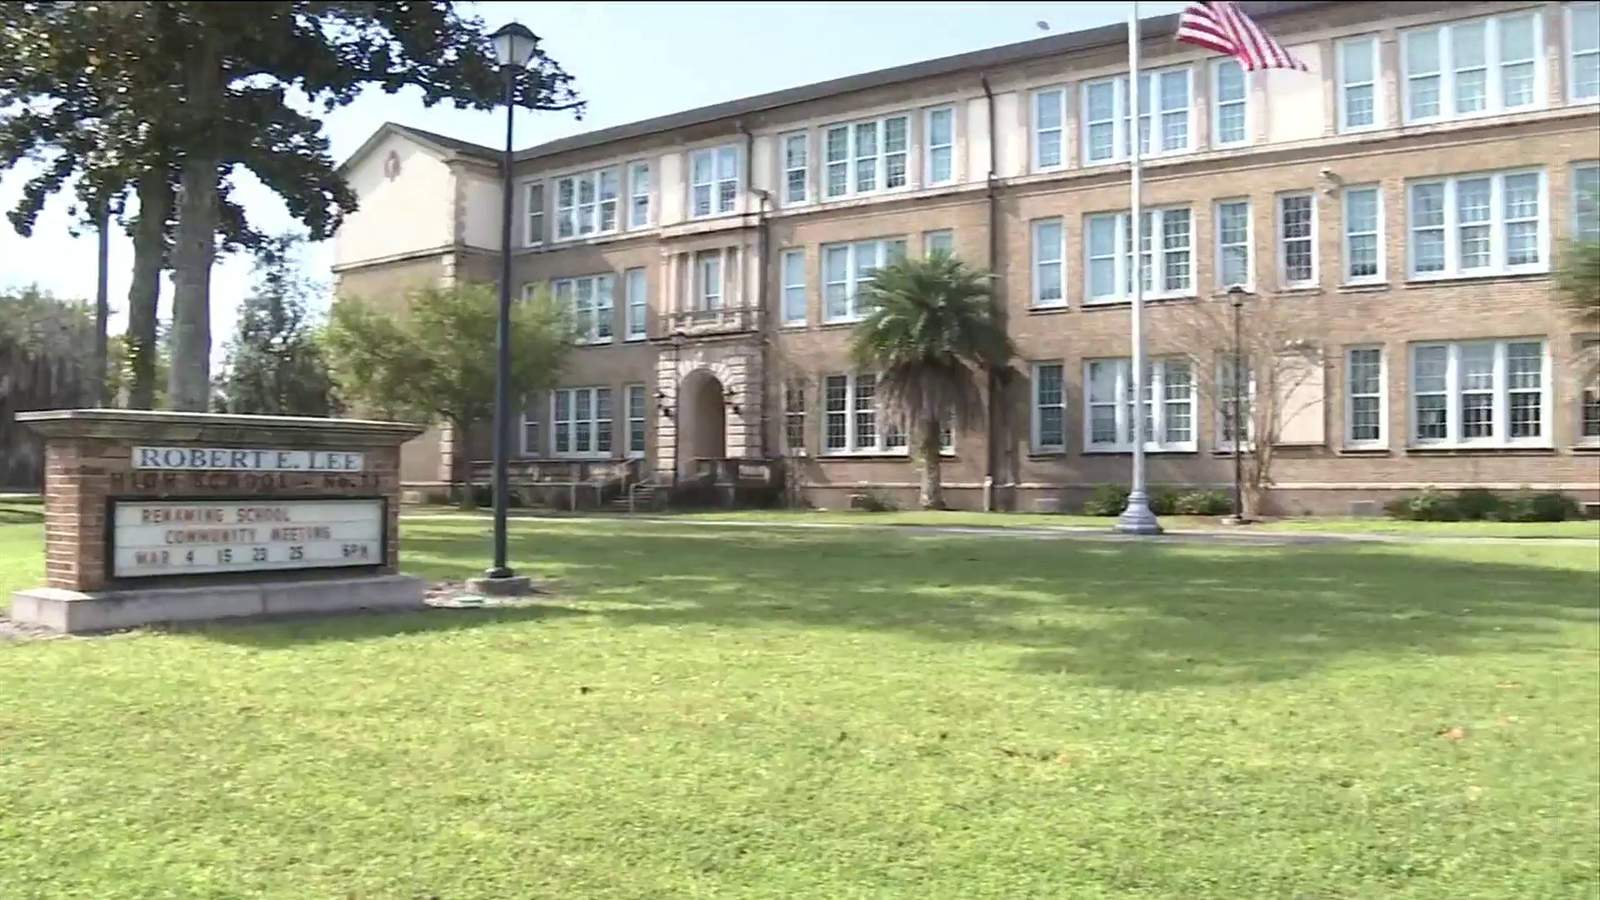 Lee High teacher reassigned to paid, non-teaching post amid controversy over BLM flag, her organization says